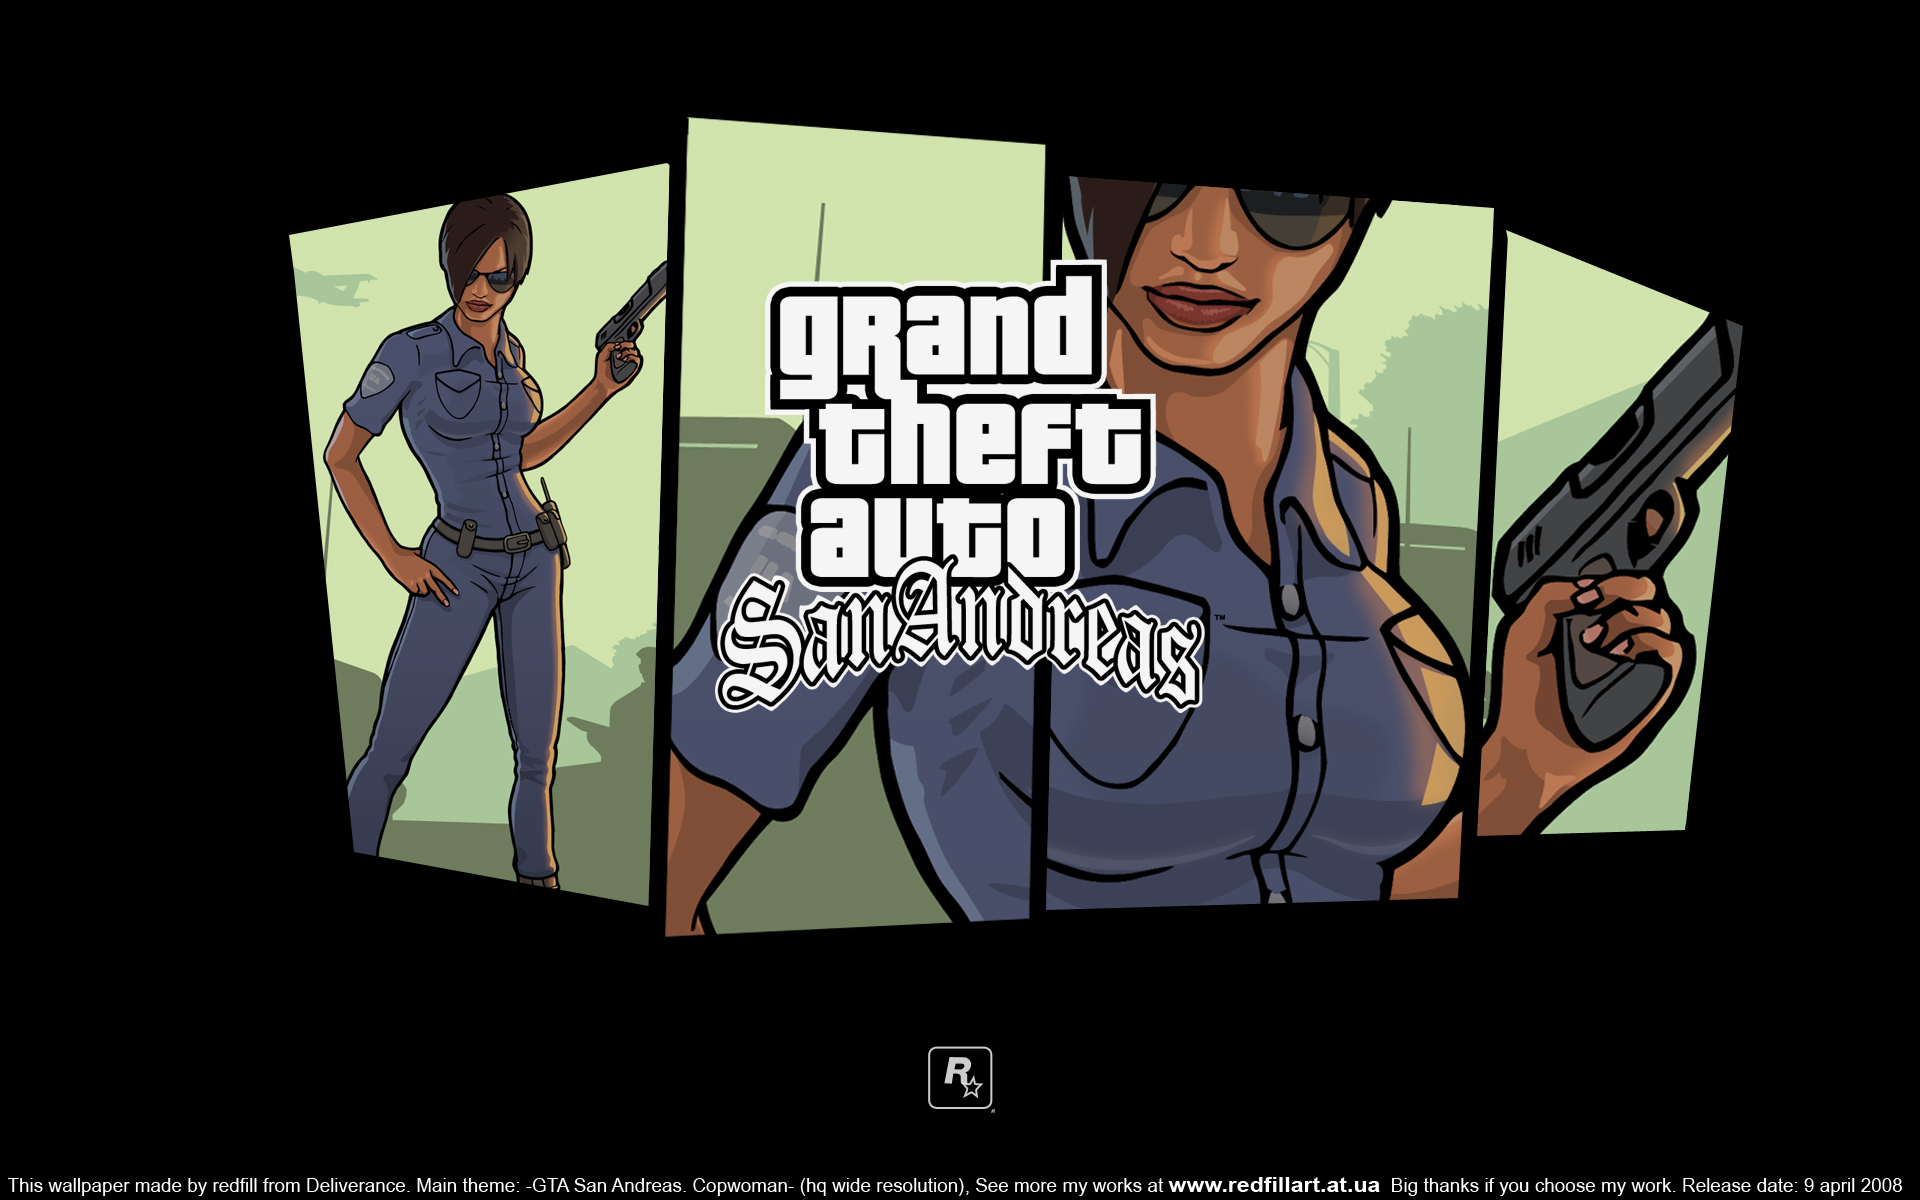 Barbara andreas in gta pc san to date how PC Cheats